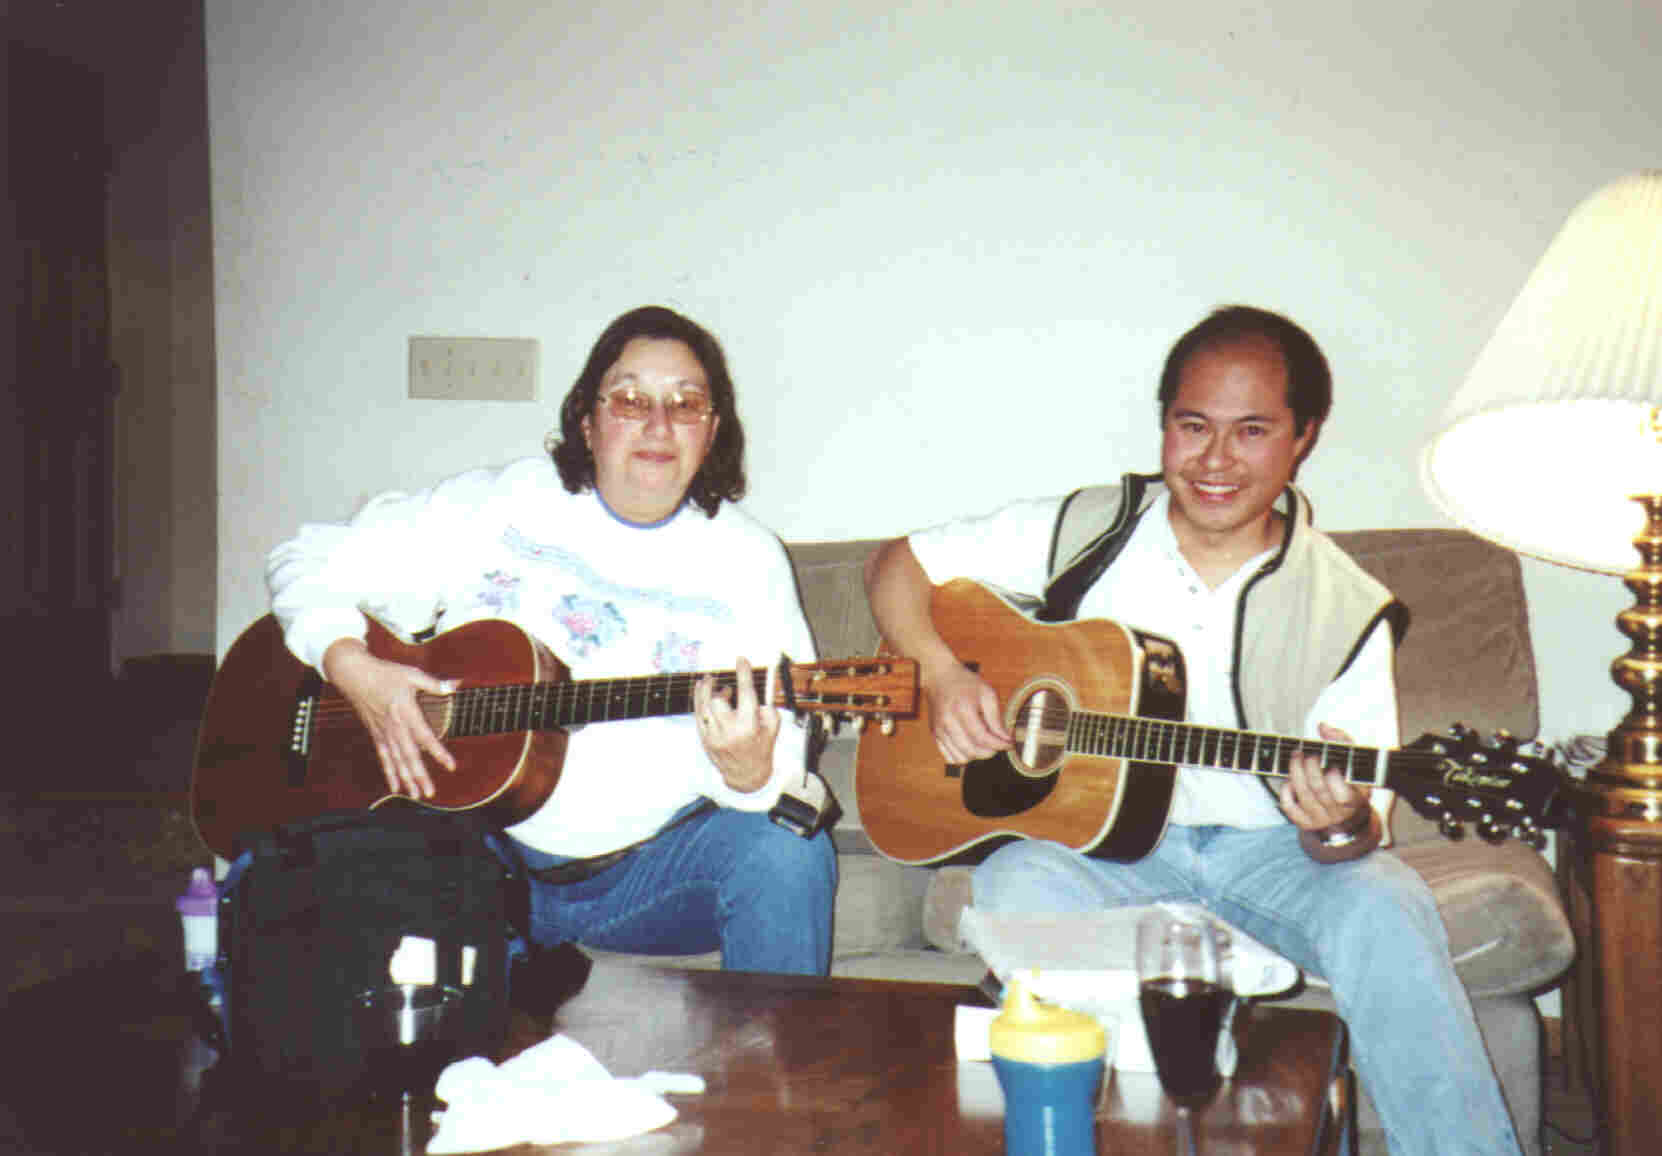 Judy and Cliff leading a sing-along